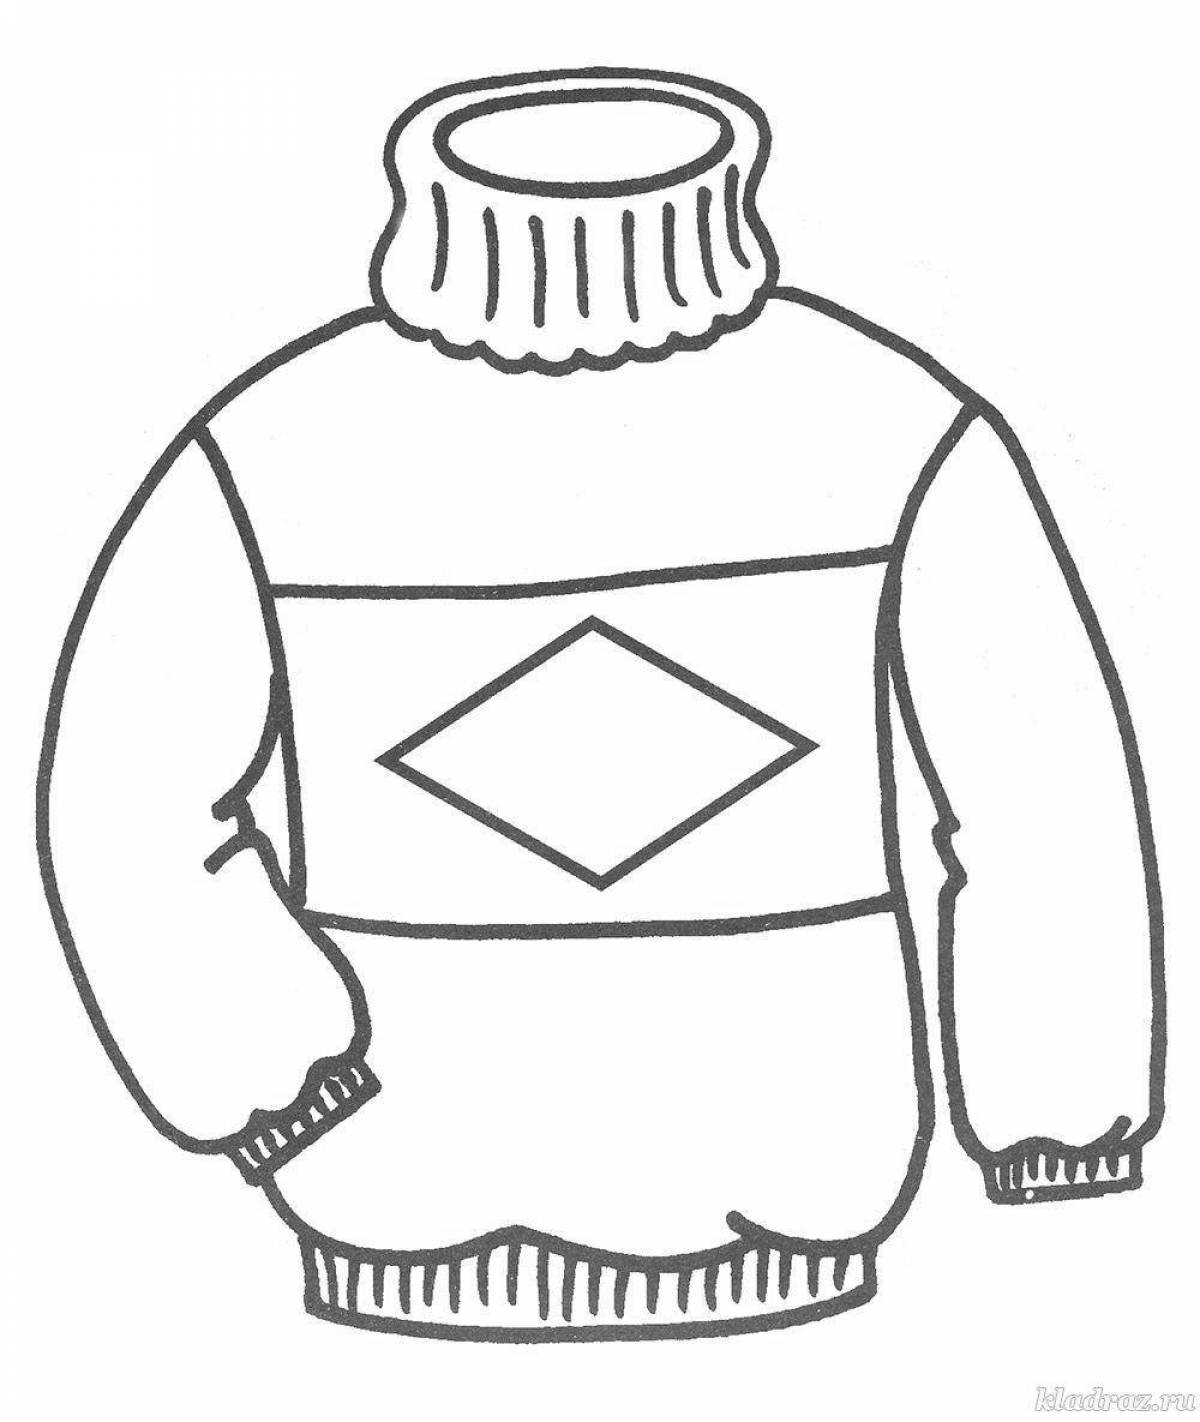 Coloring page for dazzling winter clothes for toddlers